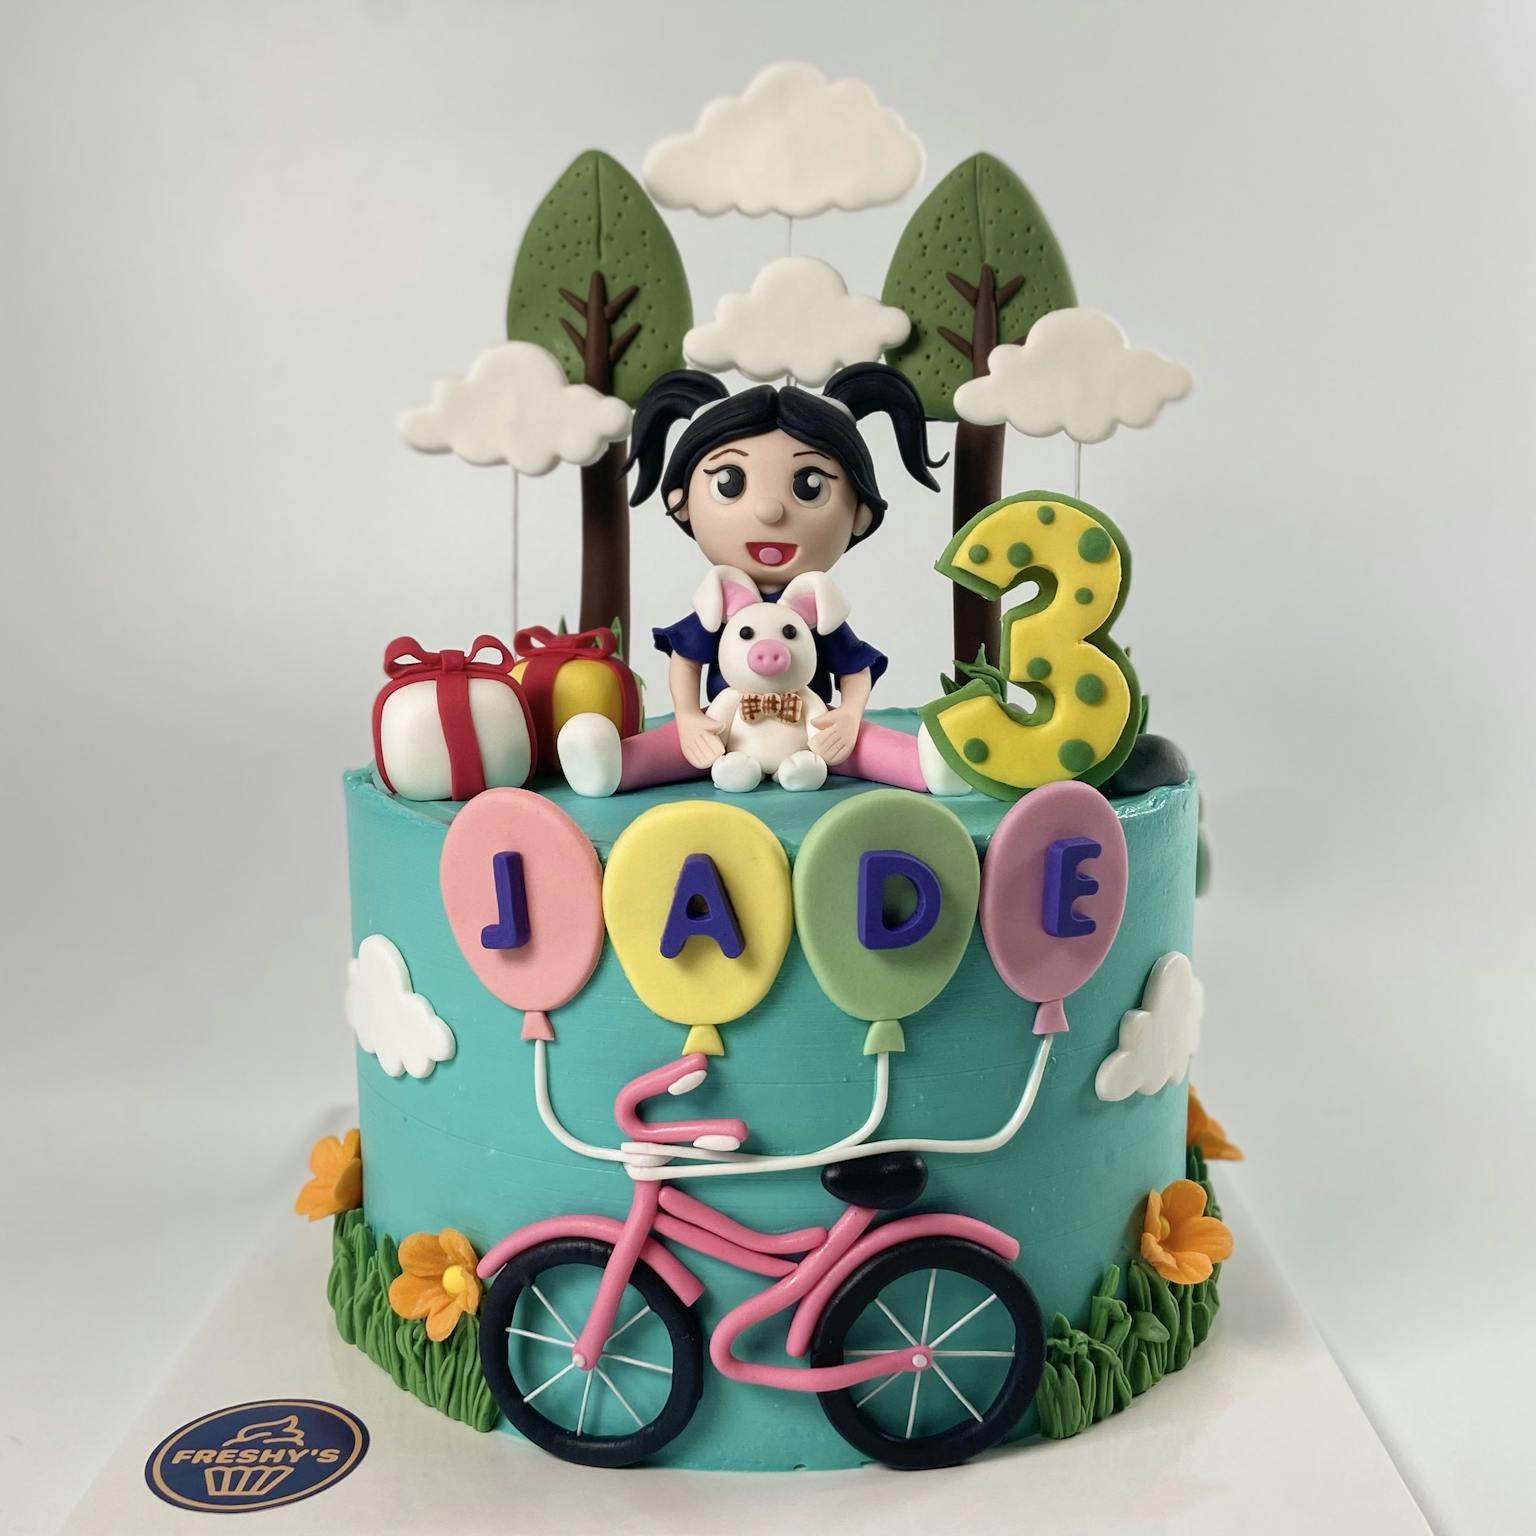 100% edible fondant sculpted girls birthday cake with trees, clouds toys and a bicycle